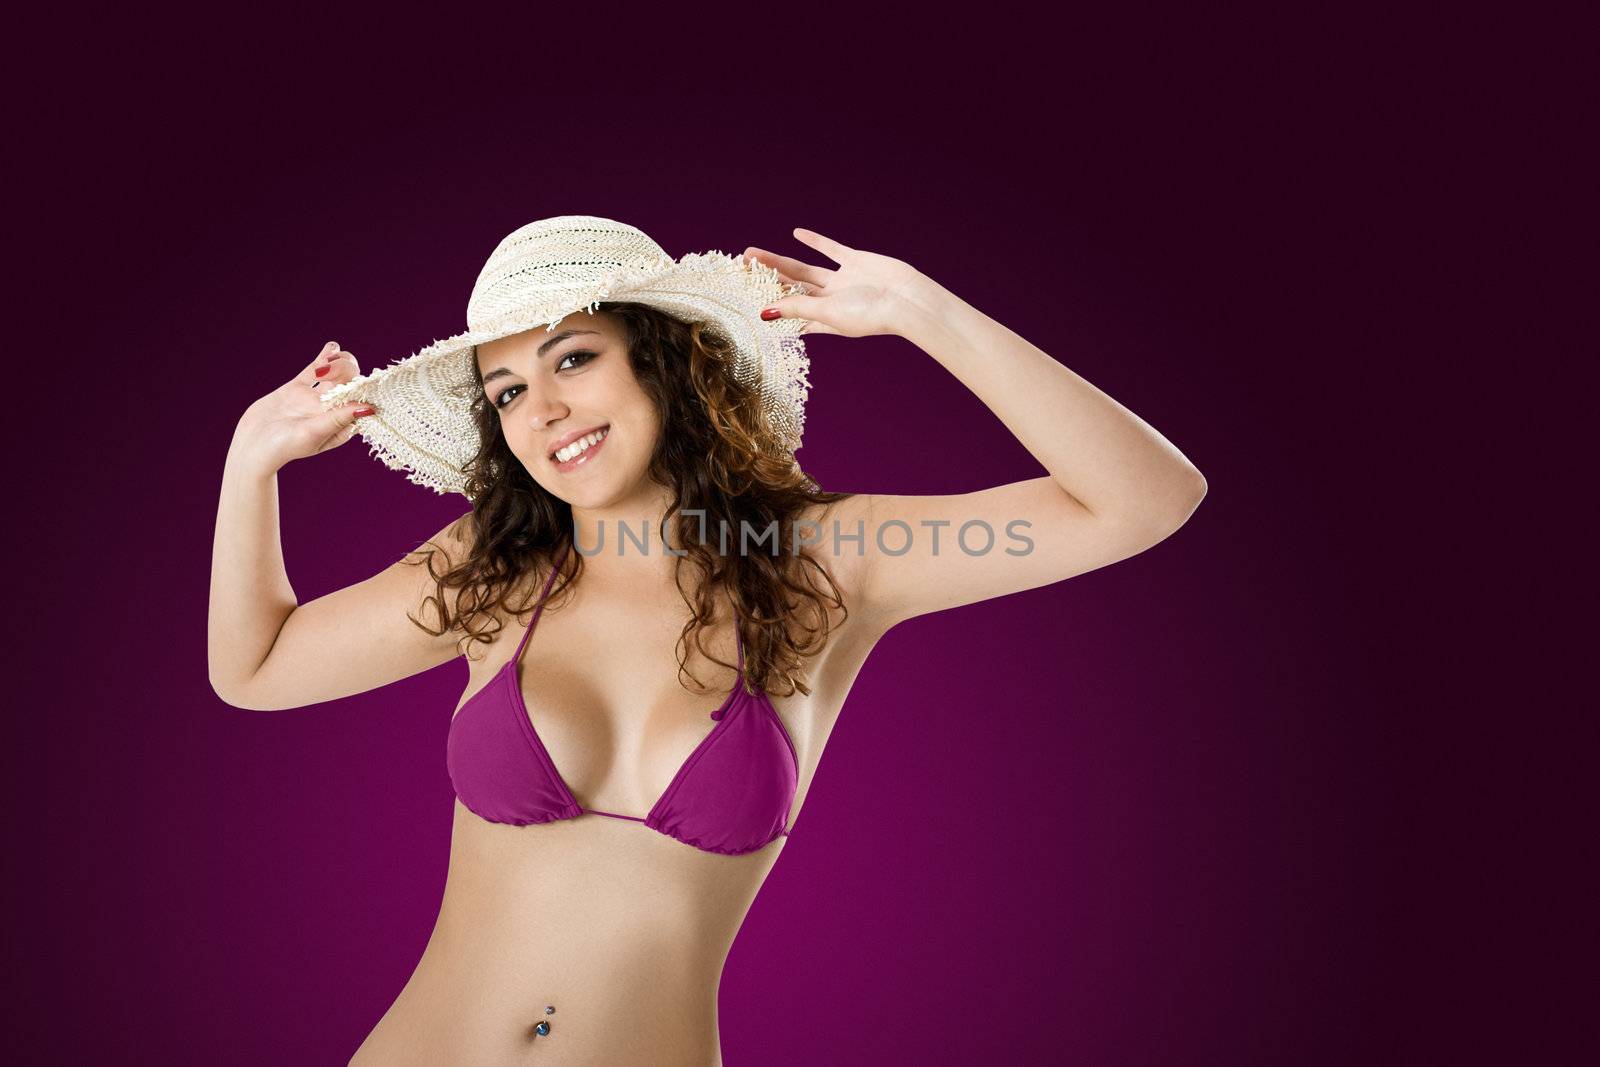 Portrait of a beautiful young woman in bikini posing on a violet background